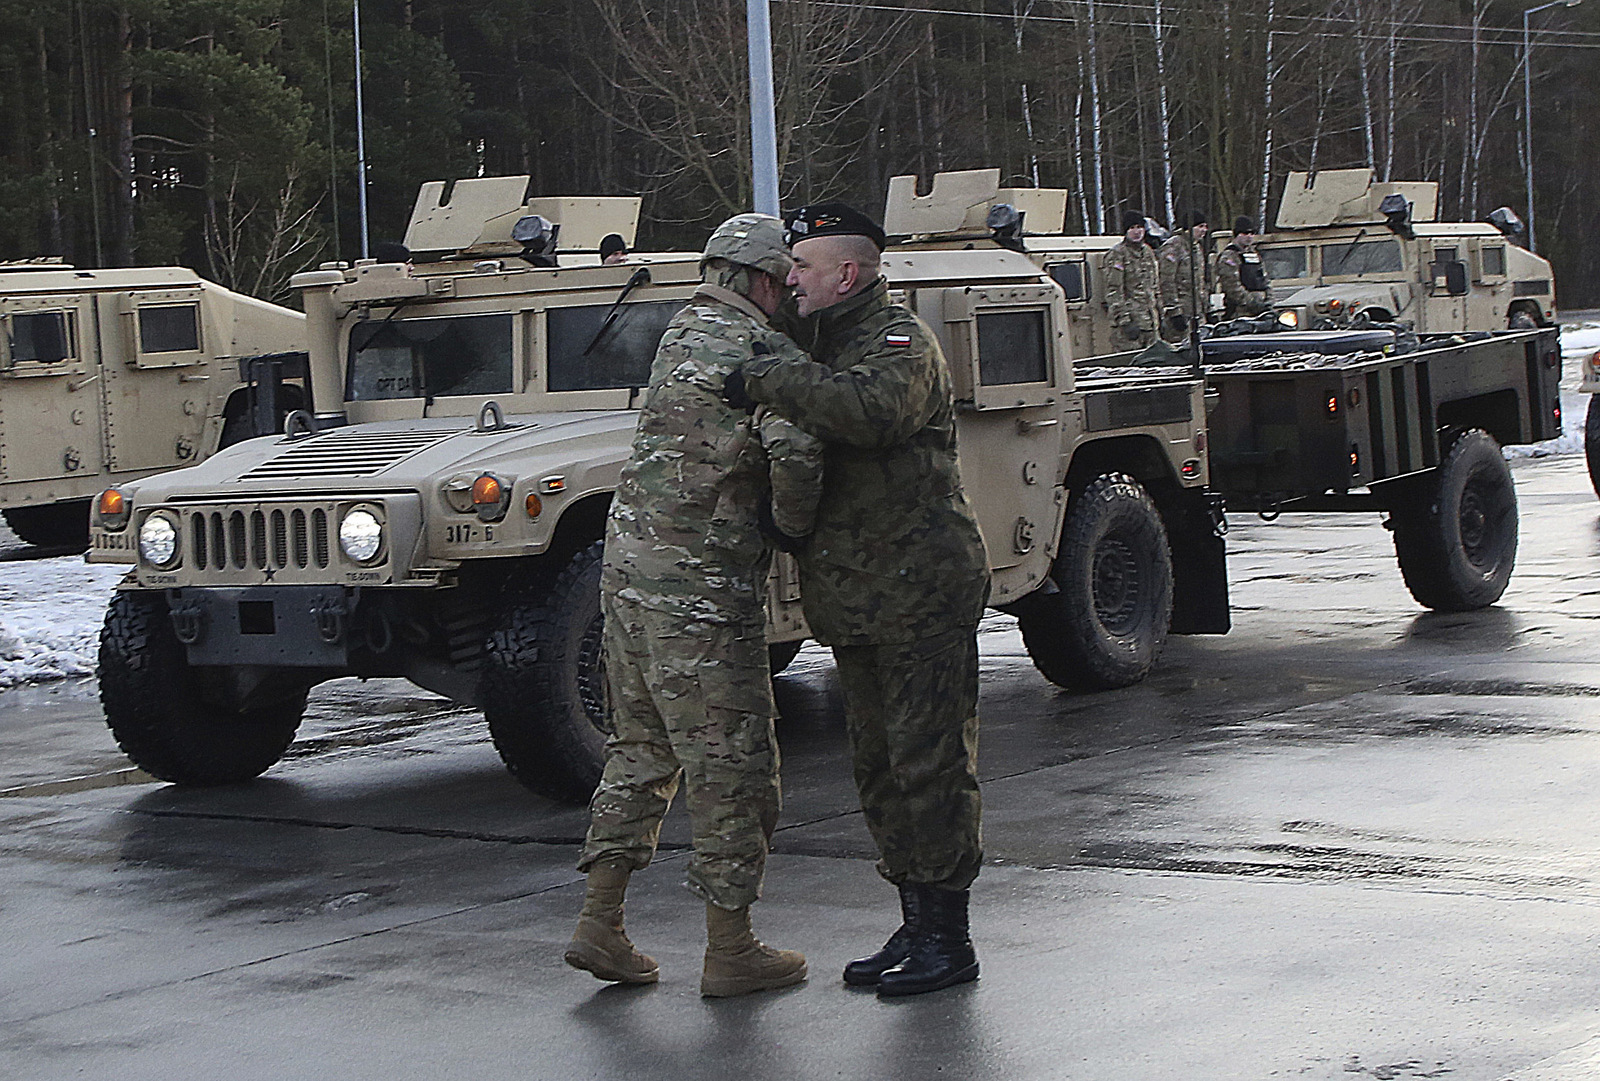 A U.S. soldier is welcomed by a Polish army official as U.S. Army vehicles cross the Polish border in Olszyna, Poland, Thursday, Jan. 12, 2017 heading for their new base in Zagan. (AP/Czarek Sokolowski)